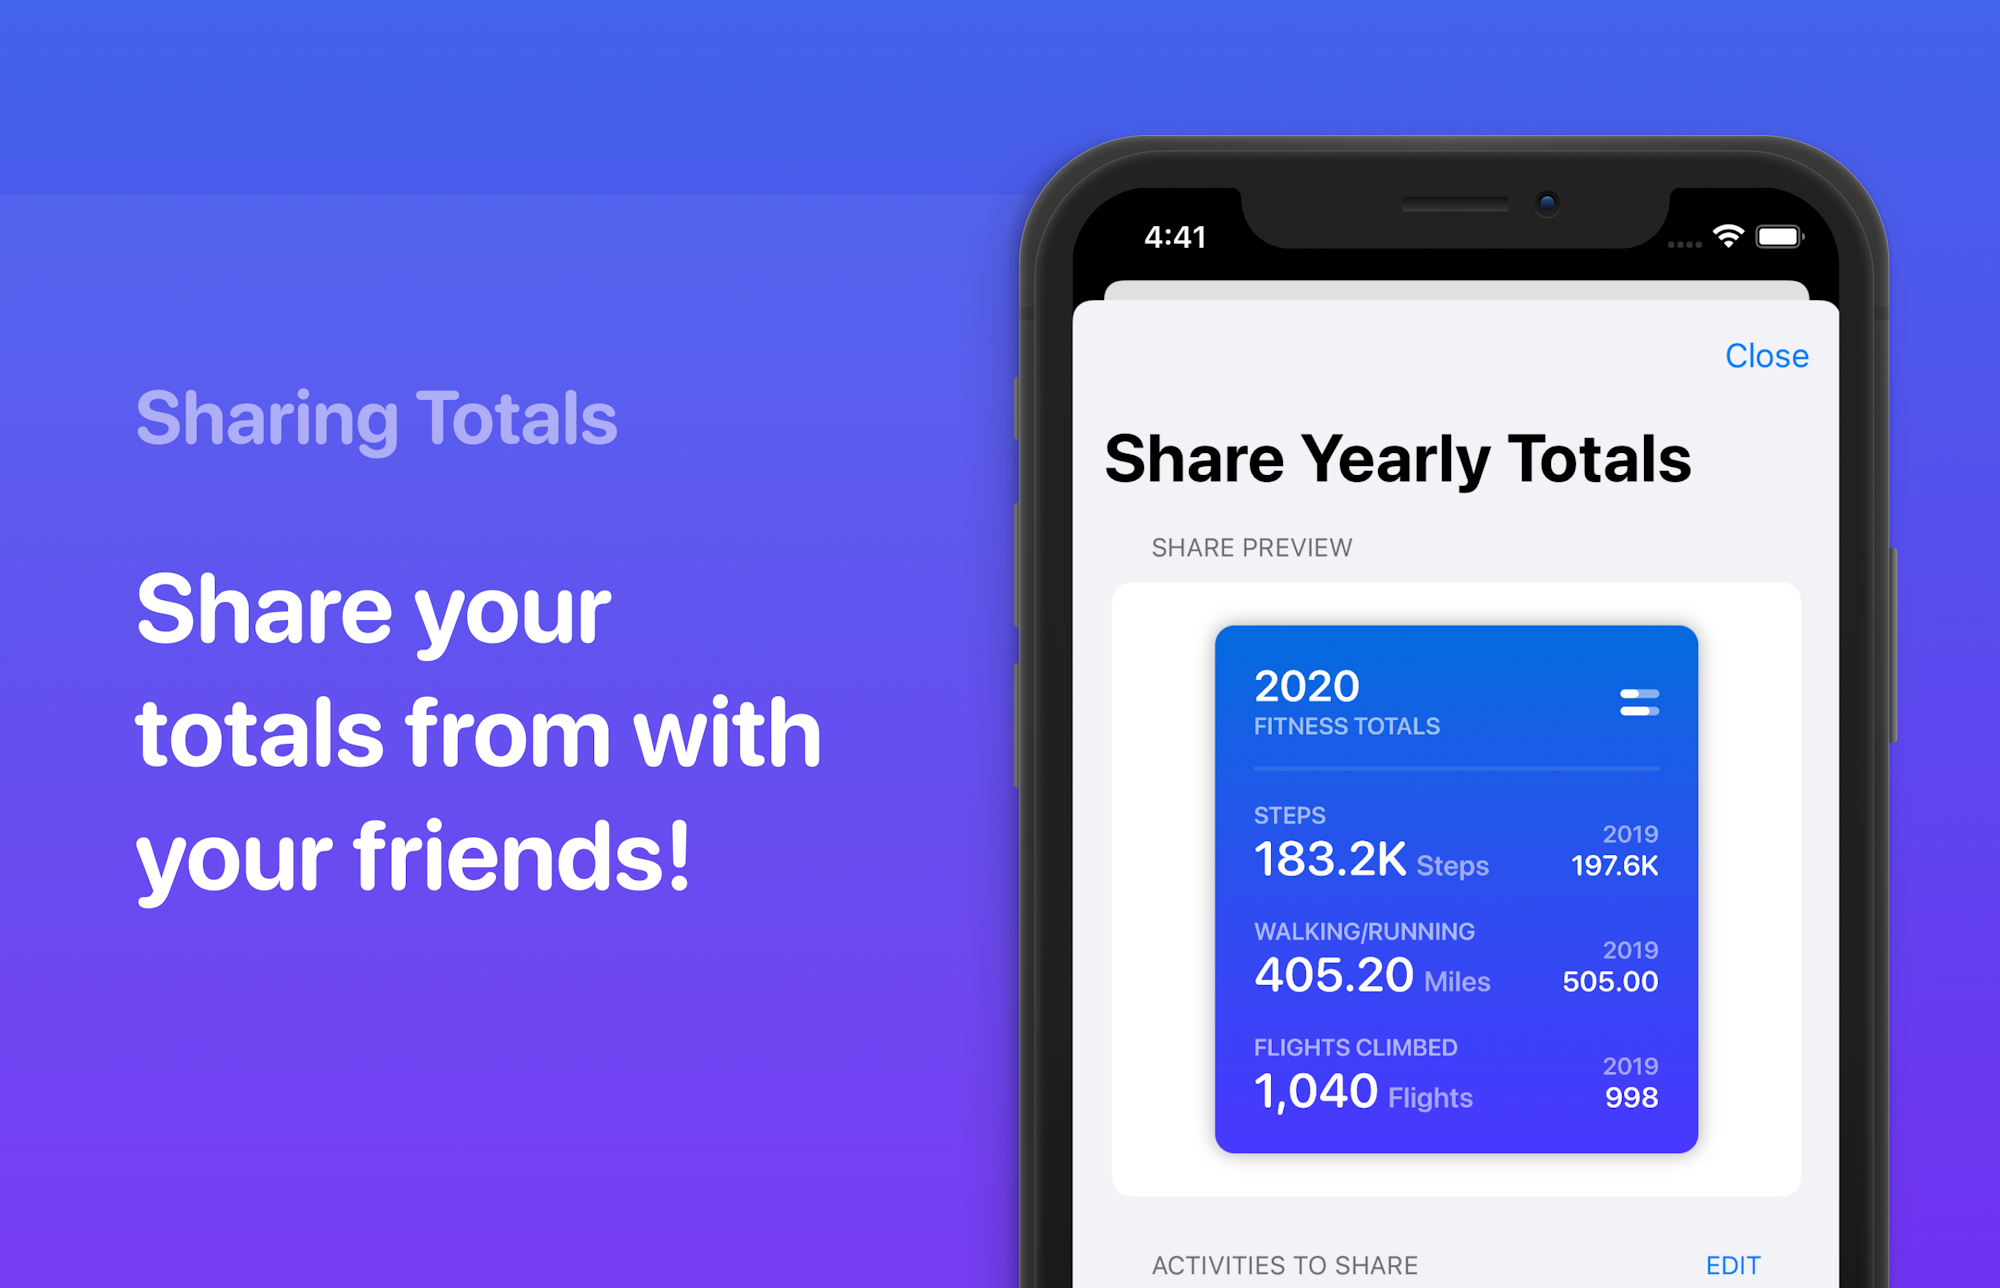 Sharing totals with friends.